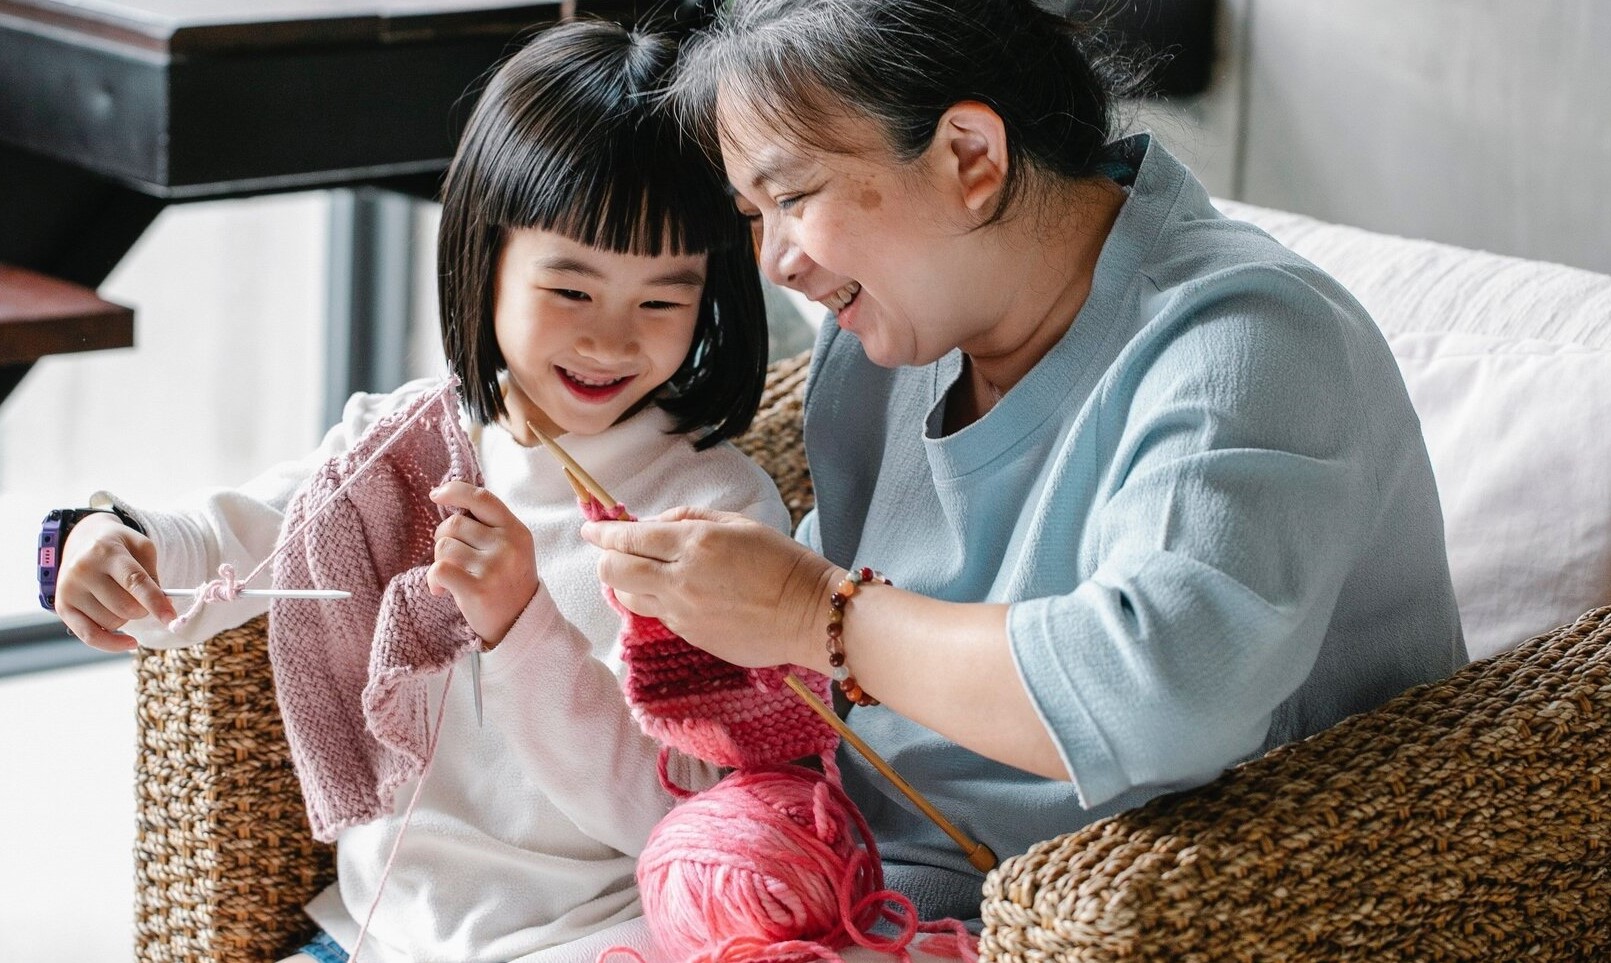 A older women smiling with a smaller child seated on her lap in a chair, she teaches the child how to knit with pink yarn